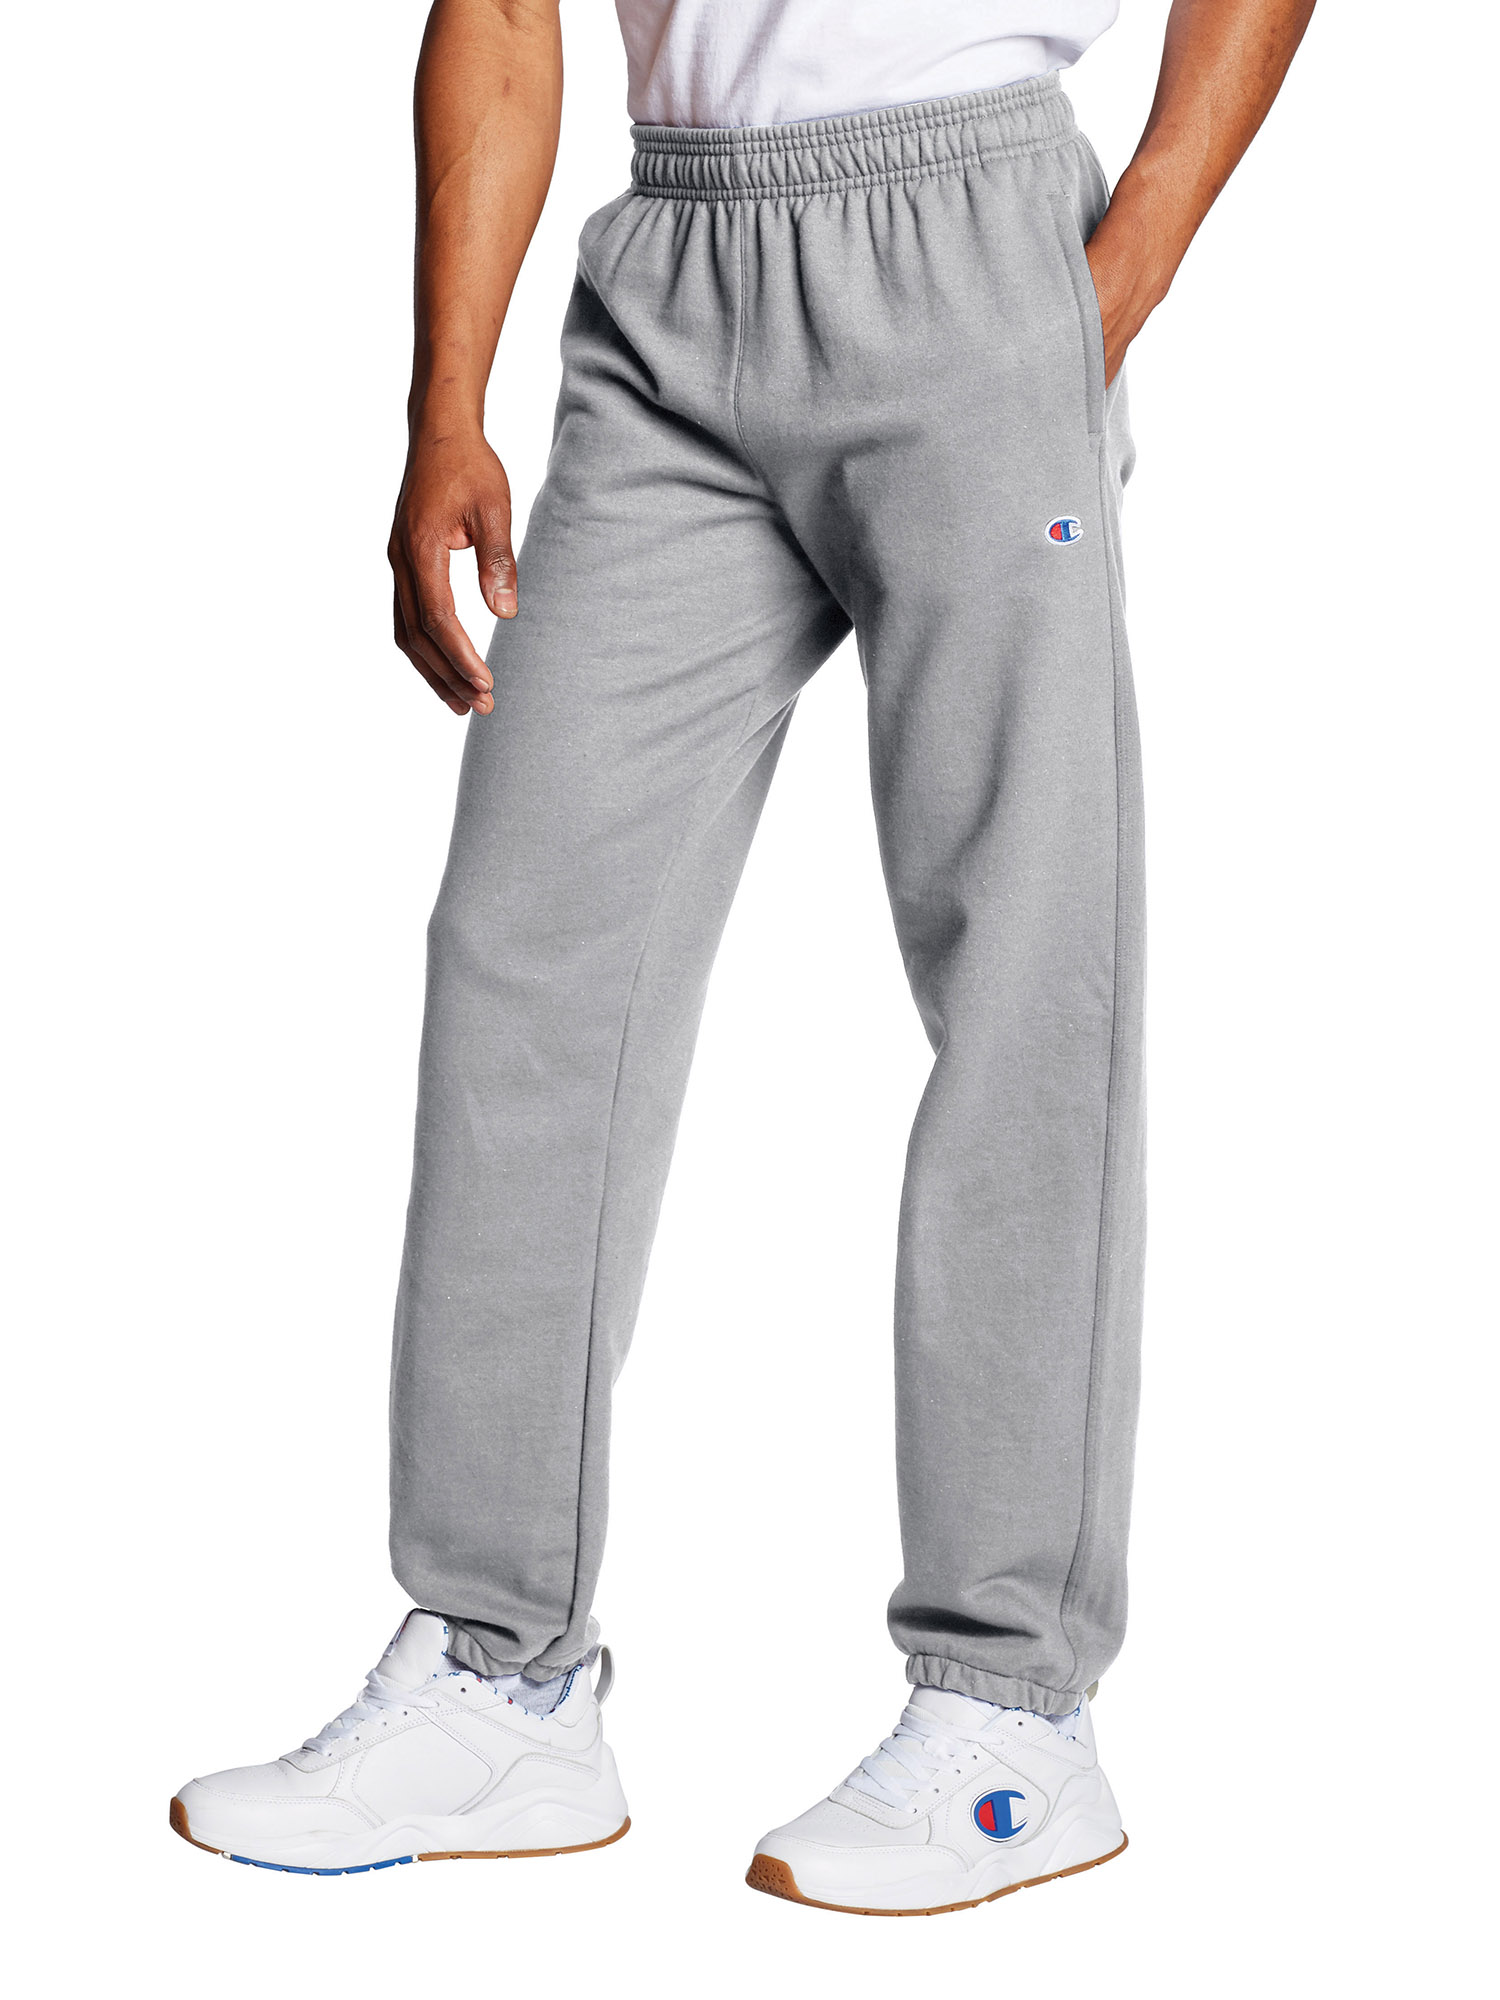 Champion Men's Powerblend Relaxed Bottom Fleece Pant Only $10